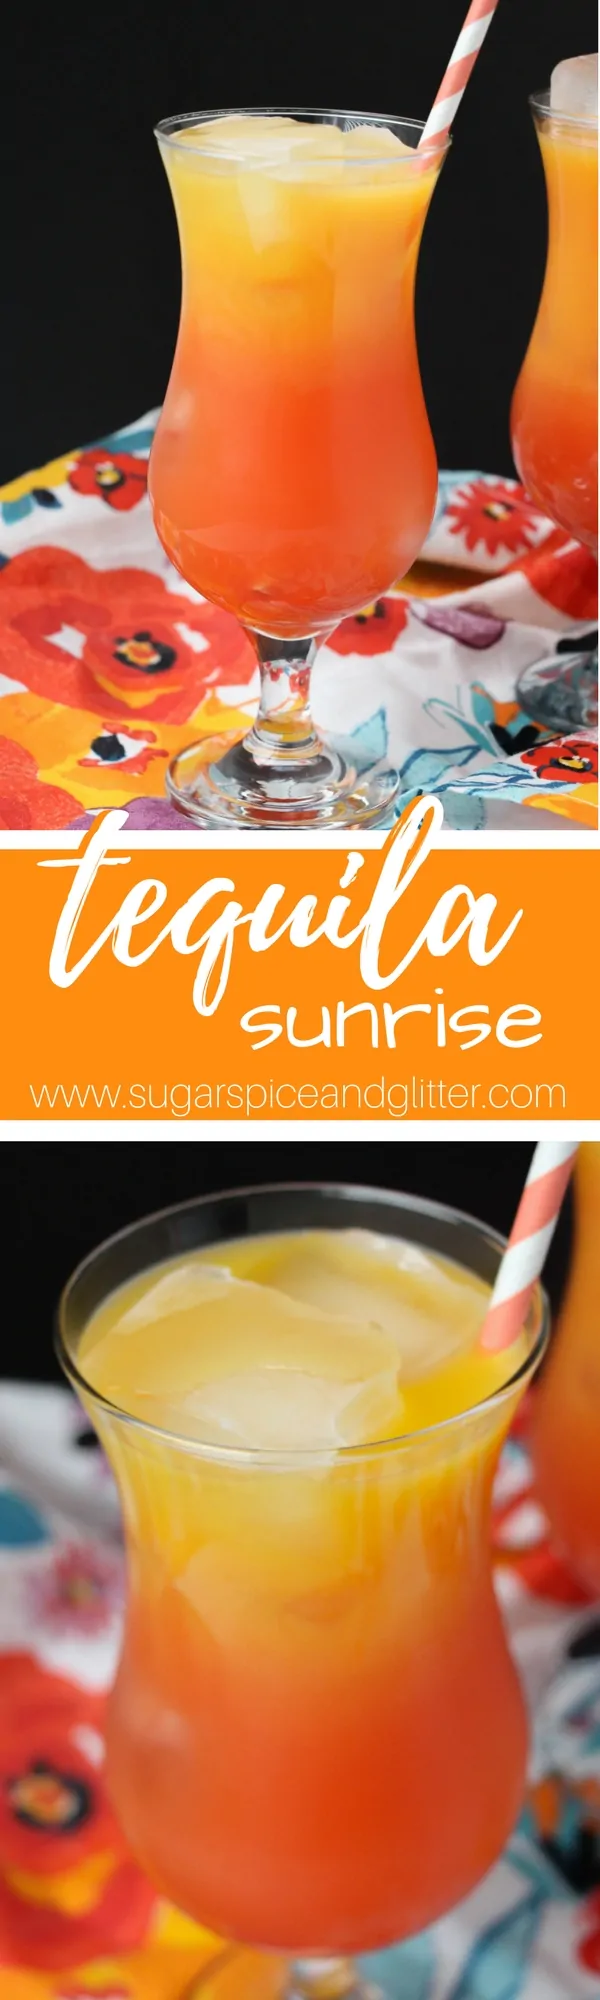 A tequila cocktail for people who don't like tequila- serve this Tequila Sunrise at your next party. A fresh and fruity tropical drink